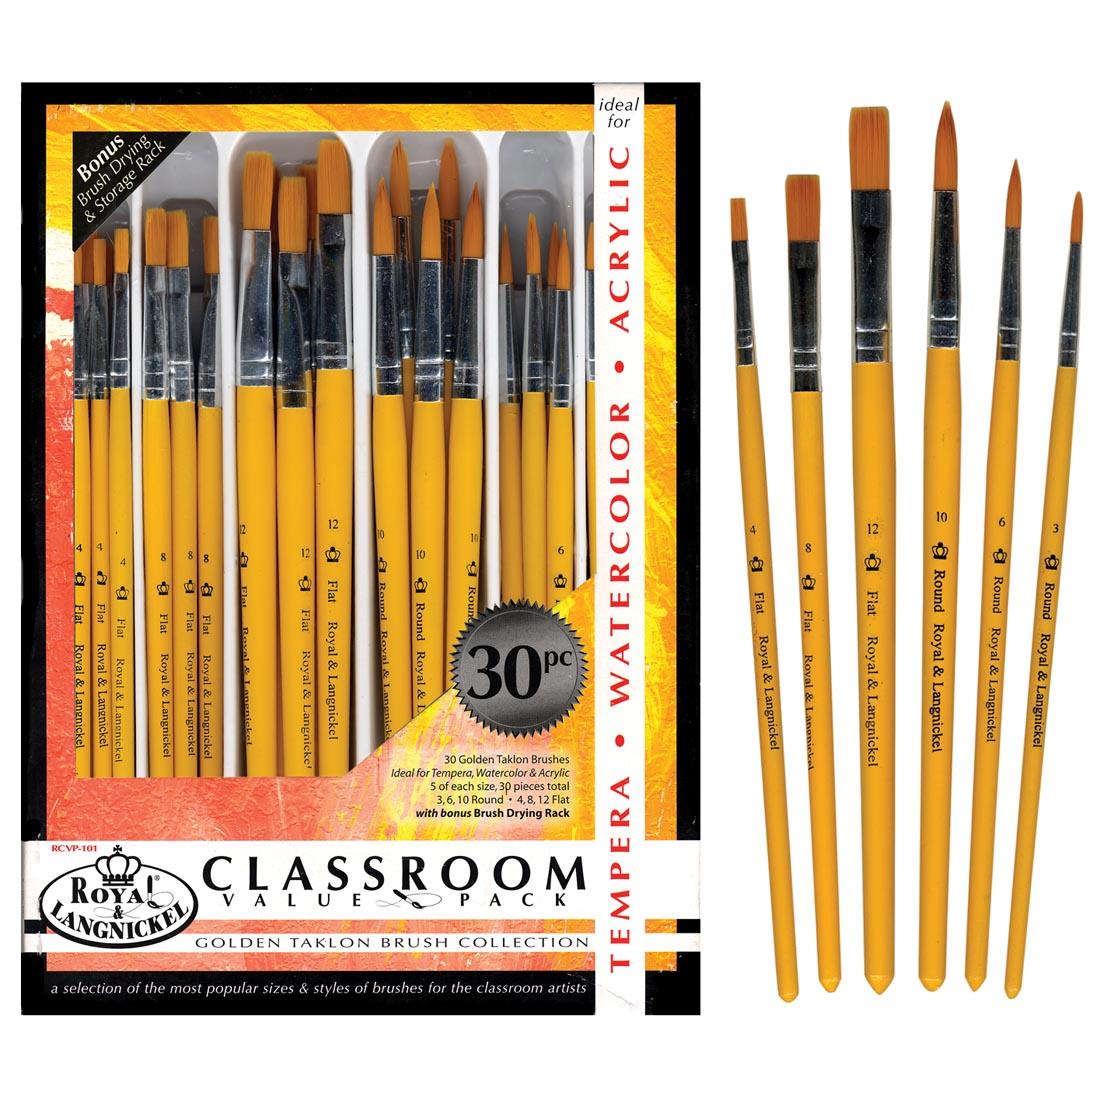 Royal & Langnickel Classroom Value Pack Golden Taklon Brush Collection shown in the package with examples of the 6 different brush sizes beside it